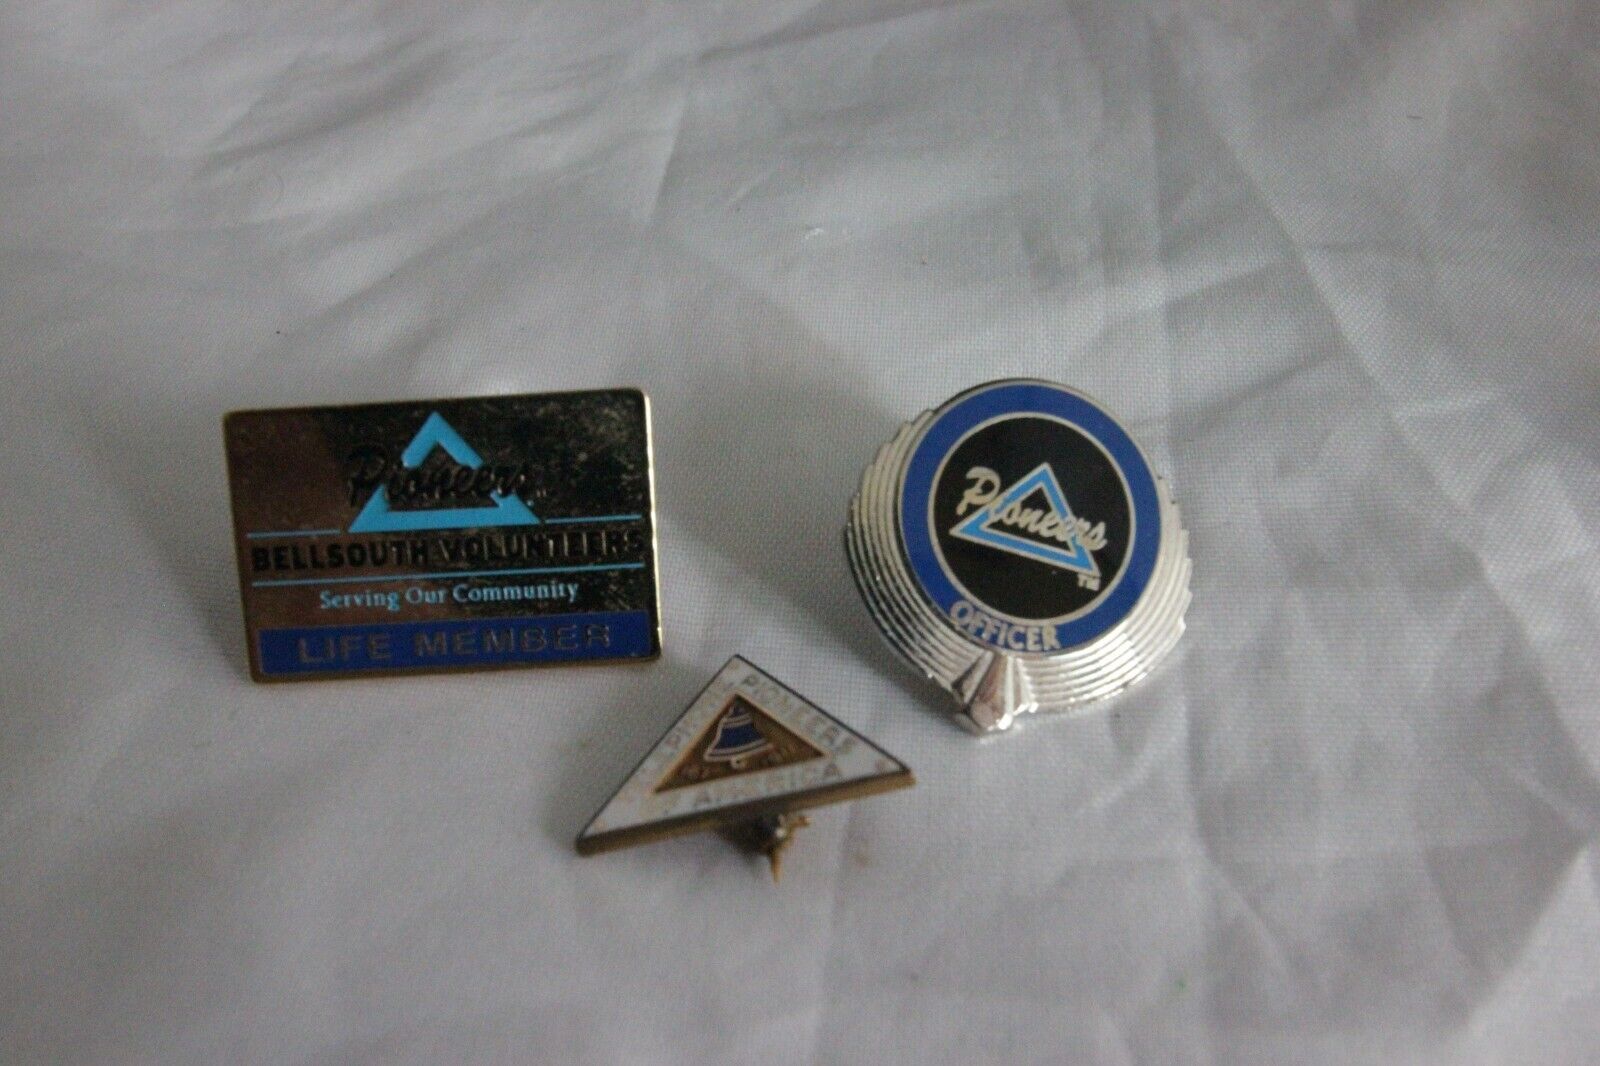 Vintage Telephone Pioneers Life Member , Triangle, and Officer Pins